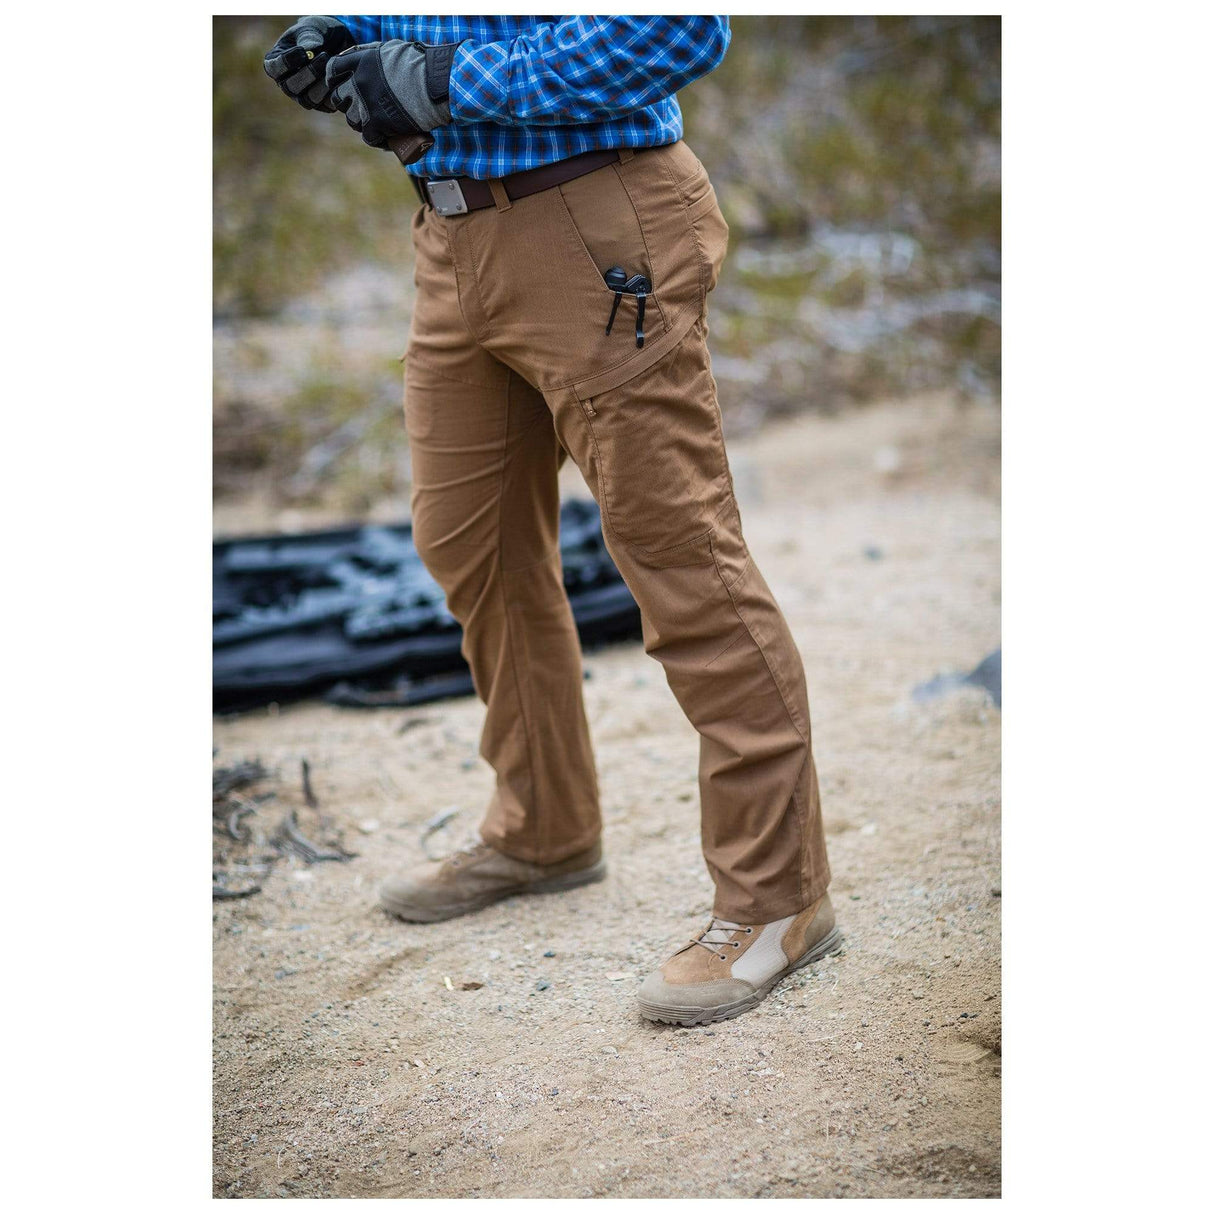 APEX PANT TUNDRA - 5.11 Tactical Finland Store